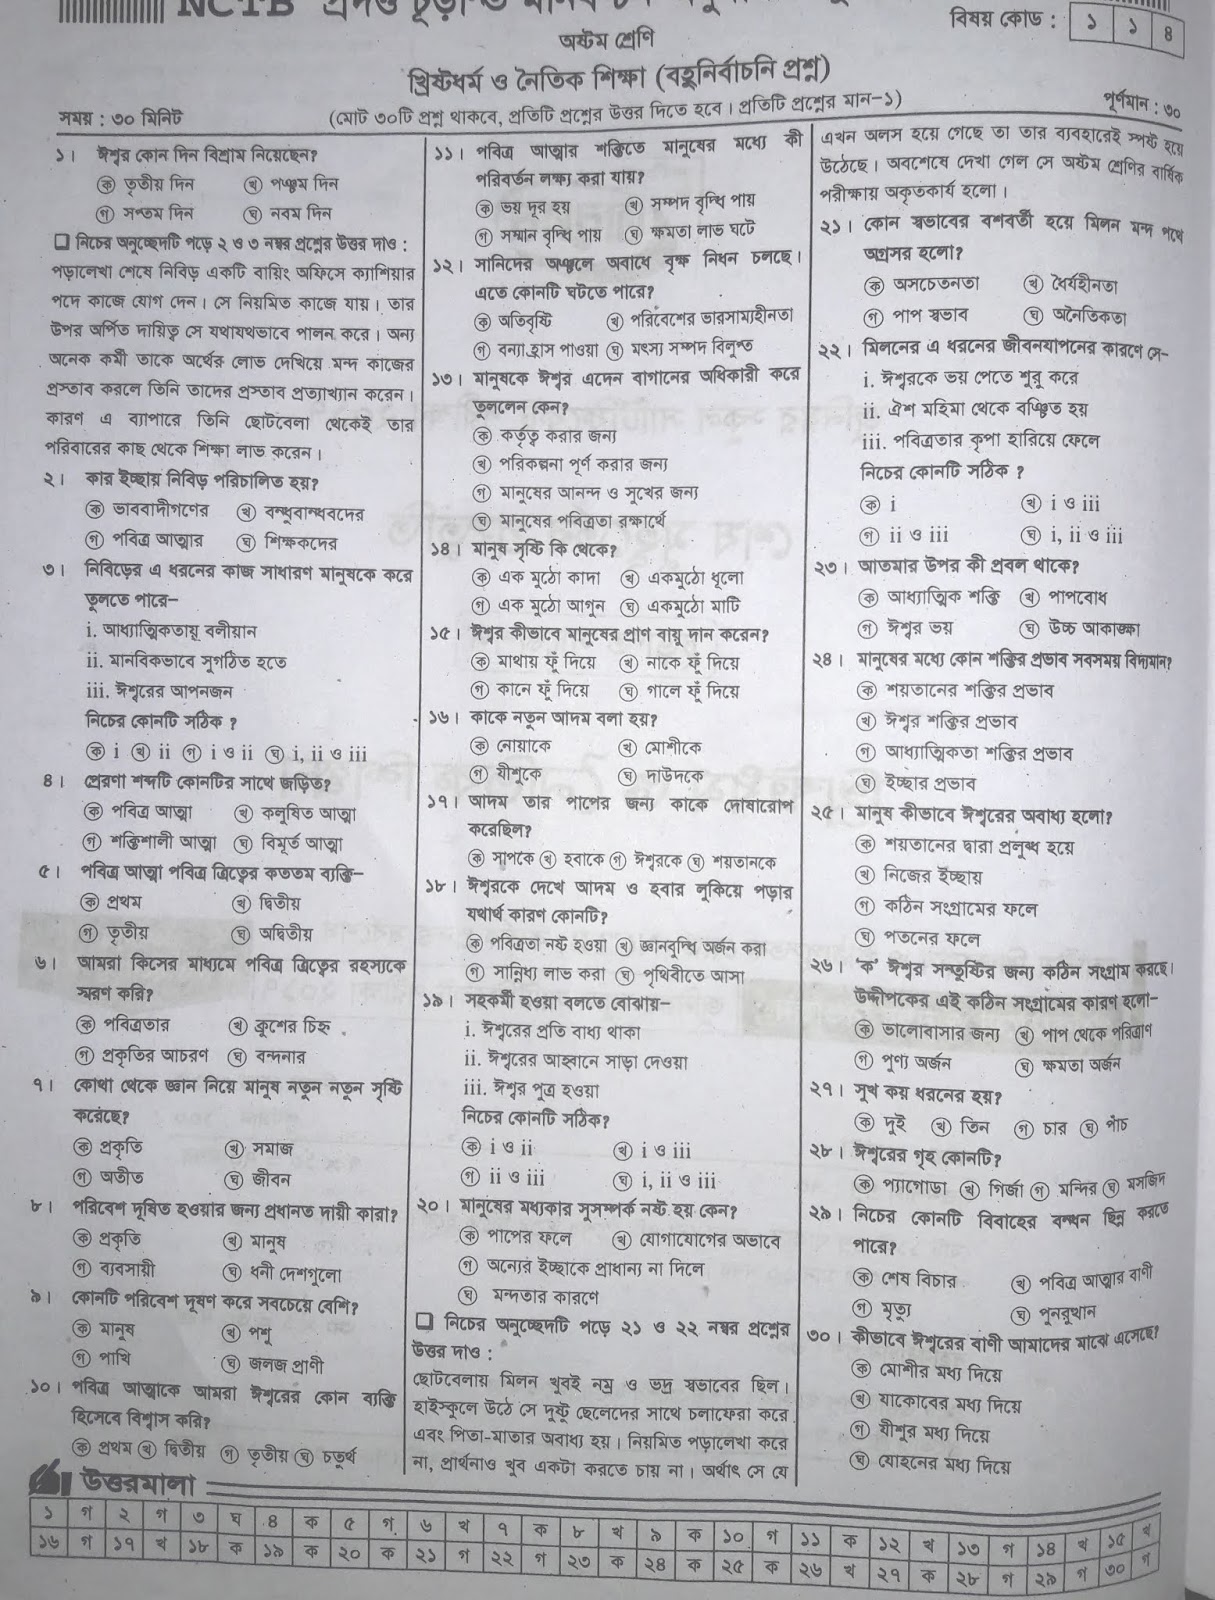 jsc Khristo Dharma and Moral Education suggestion , exam question paper, model question, mcq question, question pattern, preparation for dhaka board, all boards